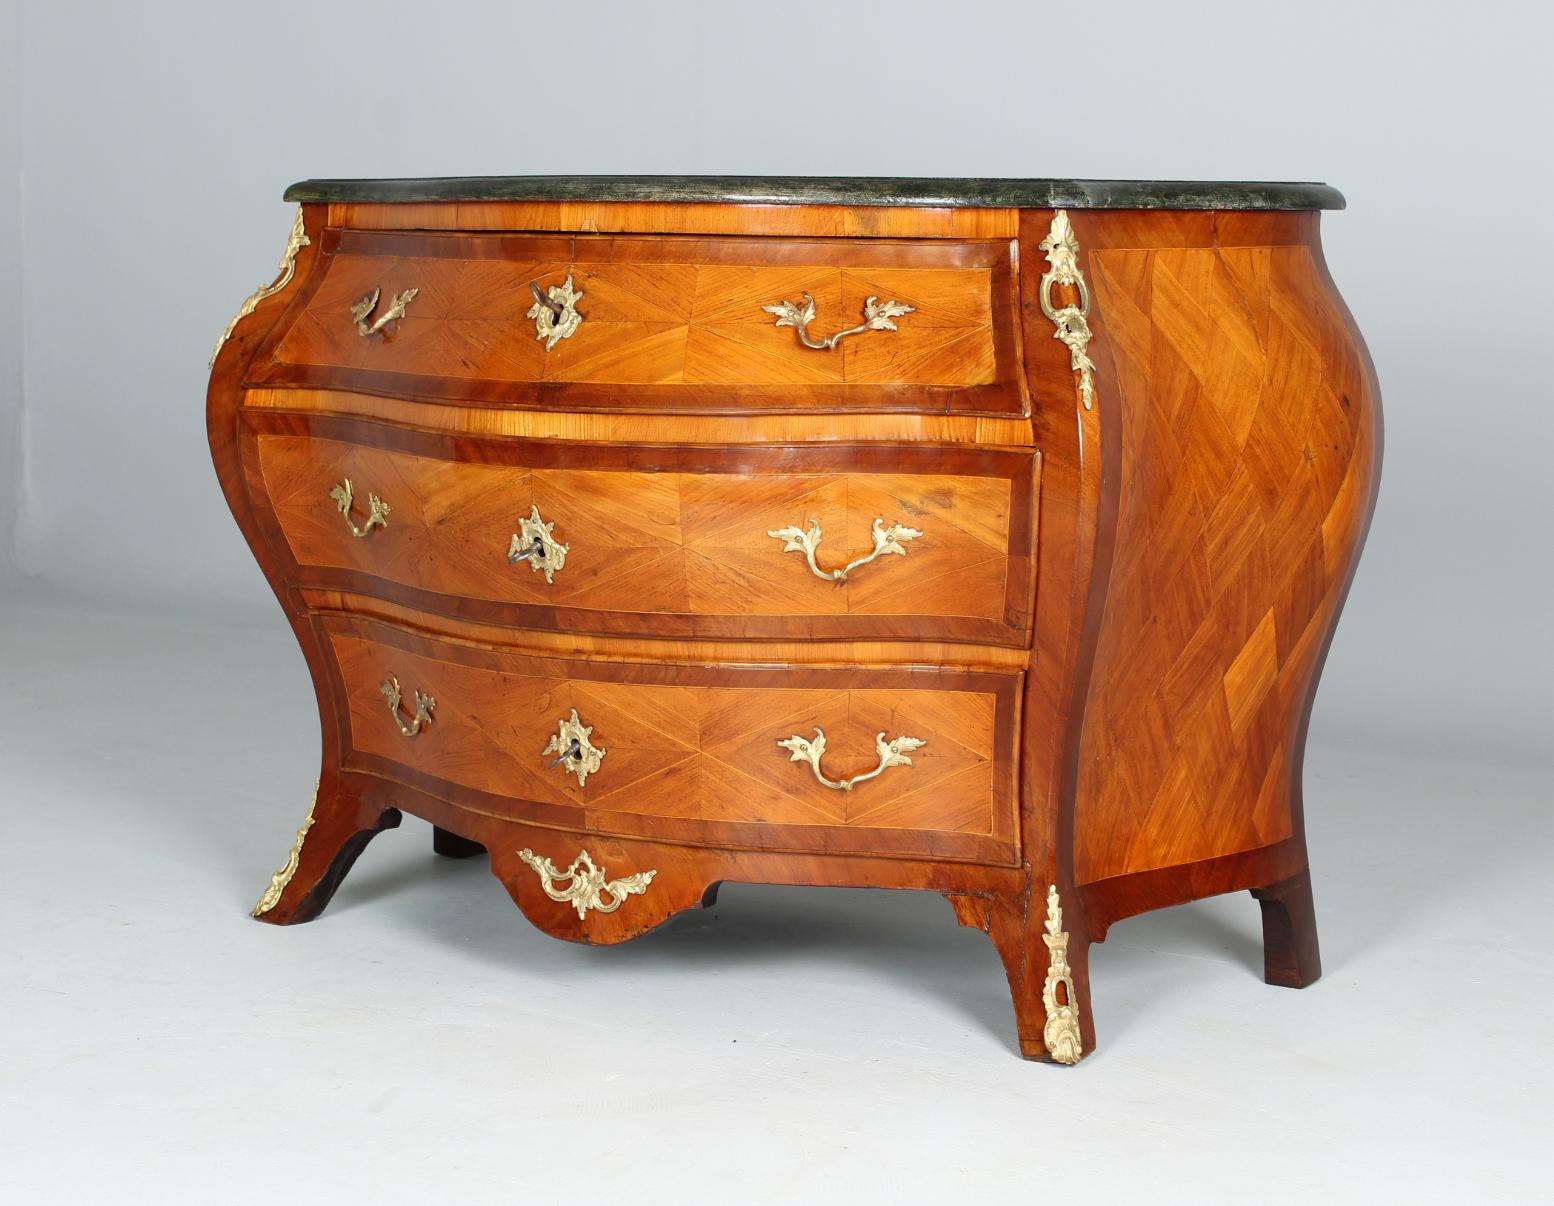 Heavily built rococo chest of drawers

Sweden
Elm, maple, walnut
around 1760

Dimensions: H x W x D: 81 x 121 x 58 cm

Description:
Exceptionally strongly built rococo chest of drawers from the mid-18th century.

Three-bay piece of